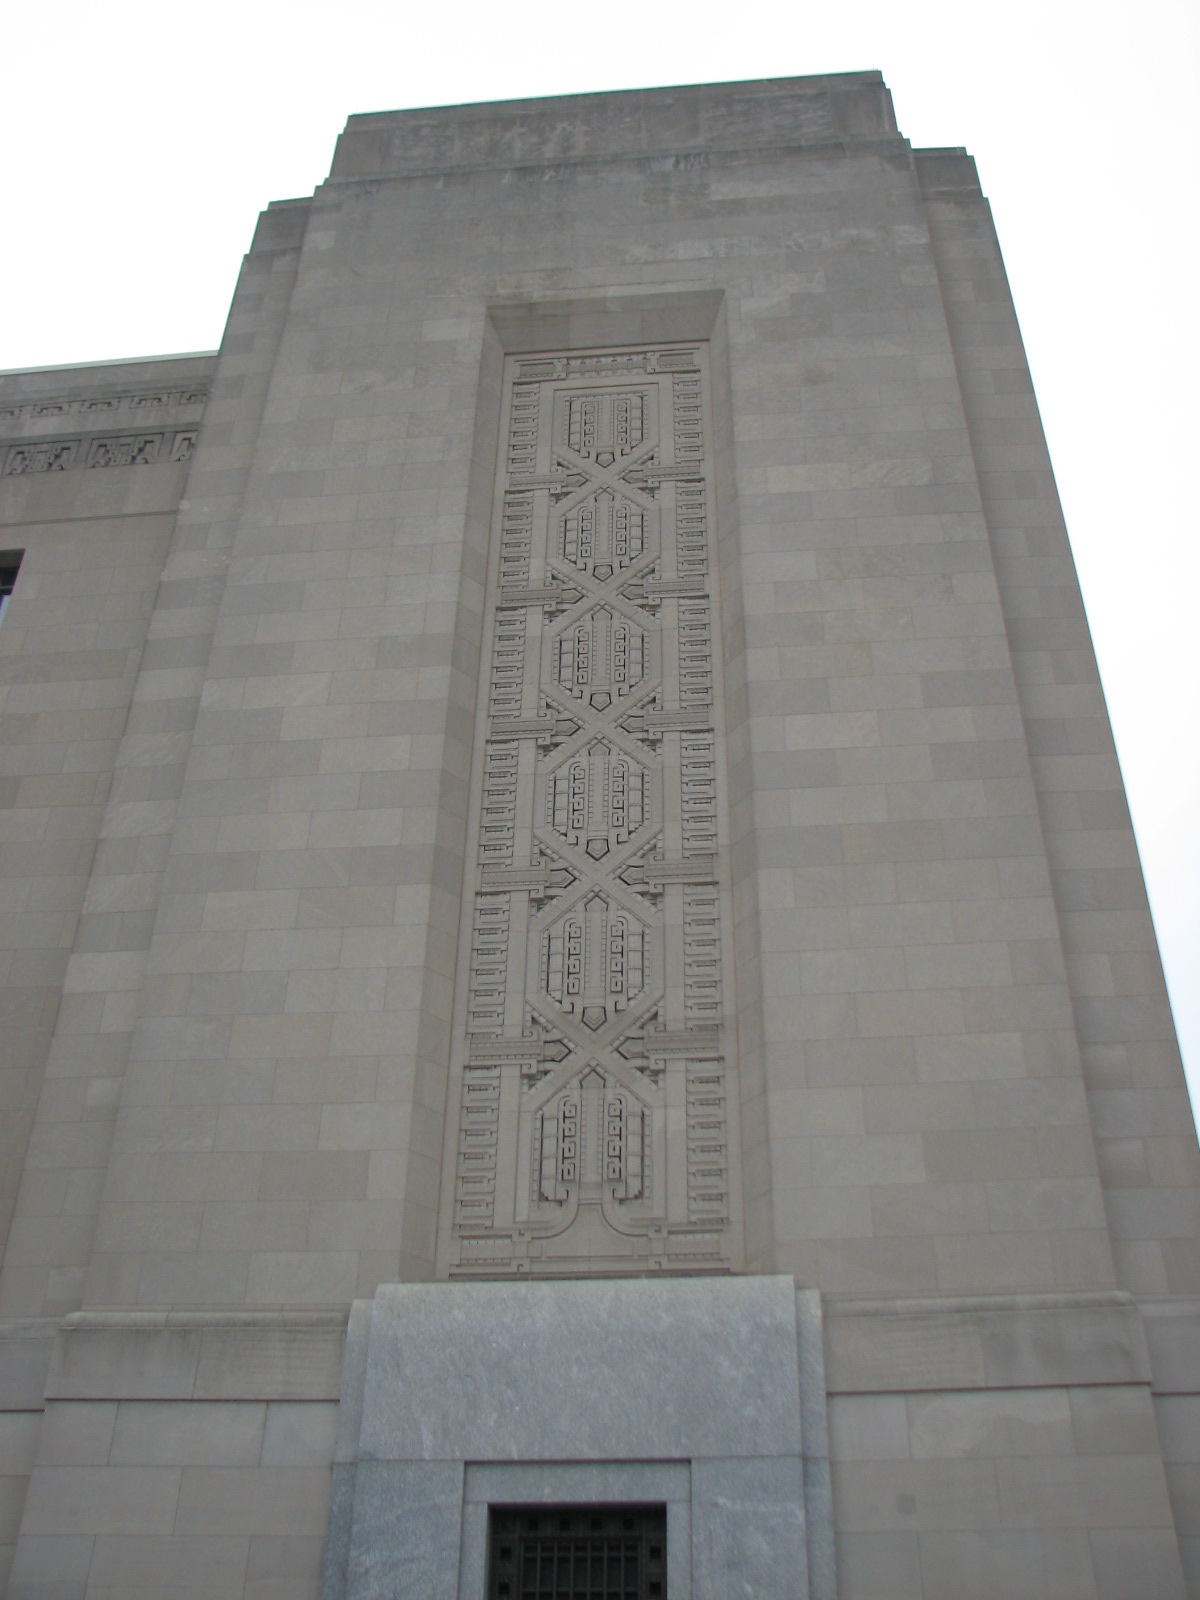 The pylons of the building are adorned with elaborate patterns.